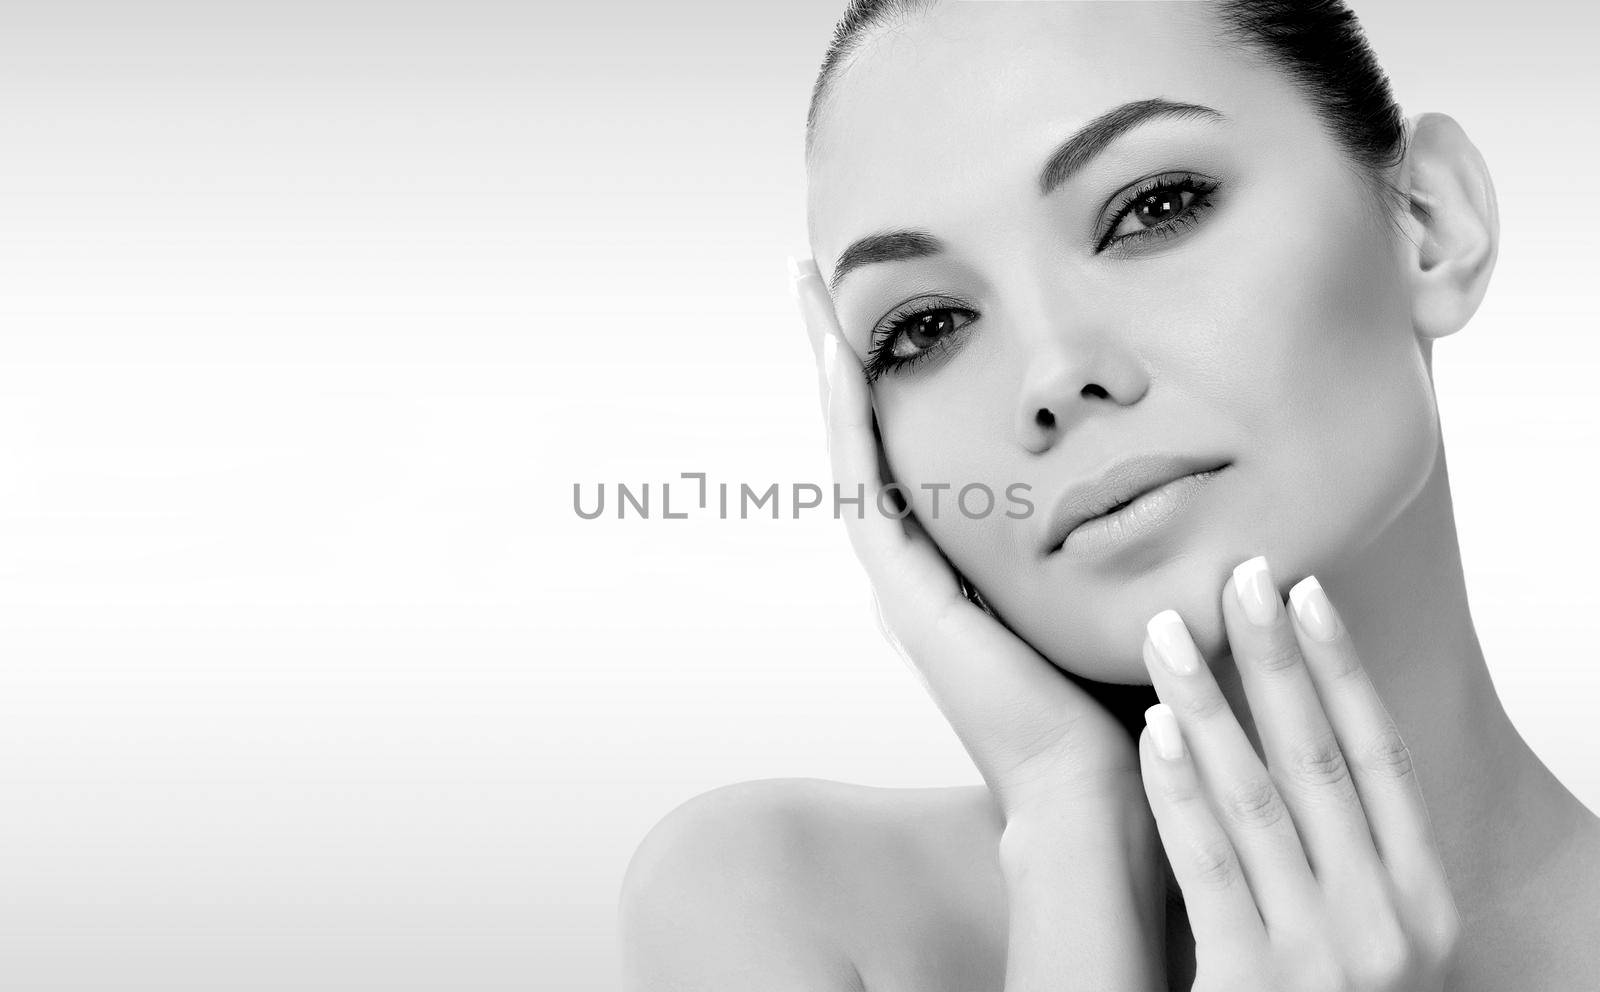 Pretty woman against a grey background with copyspace